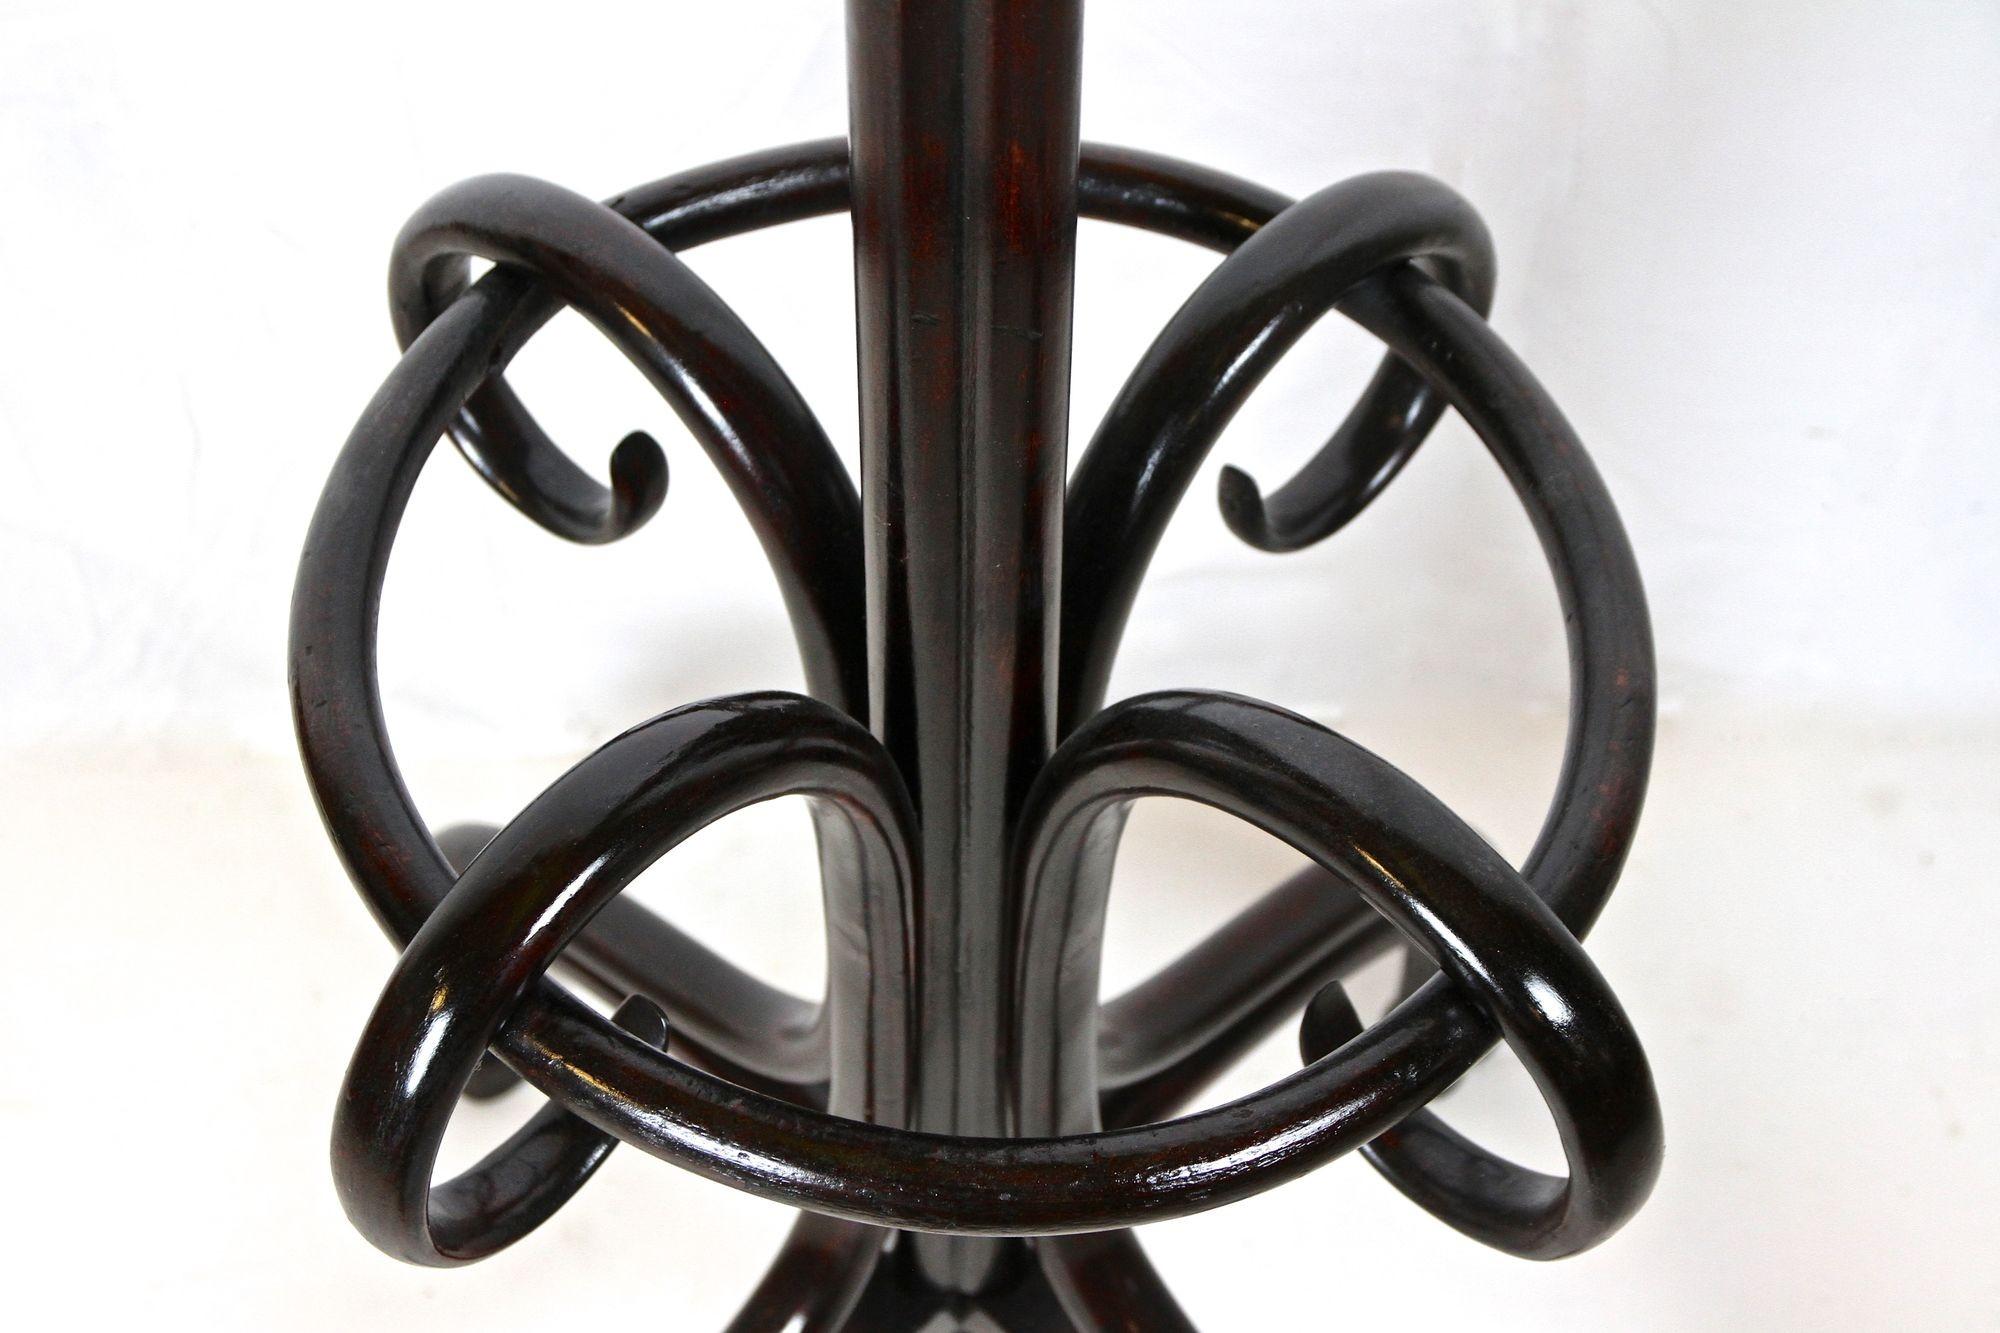 Thonet Coat Rack/ Wardrobe Stand Bentwood Polished, Art Nouveau, AT ca. 1905 For Sale 3